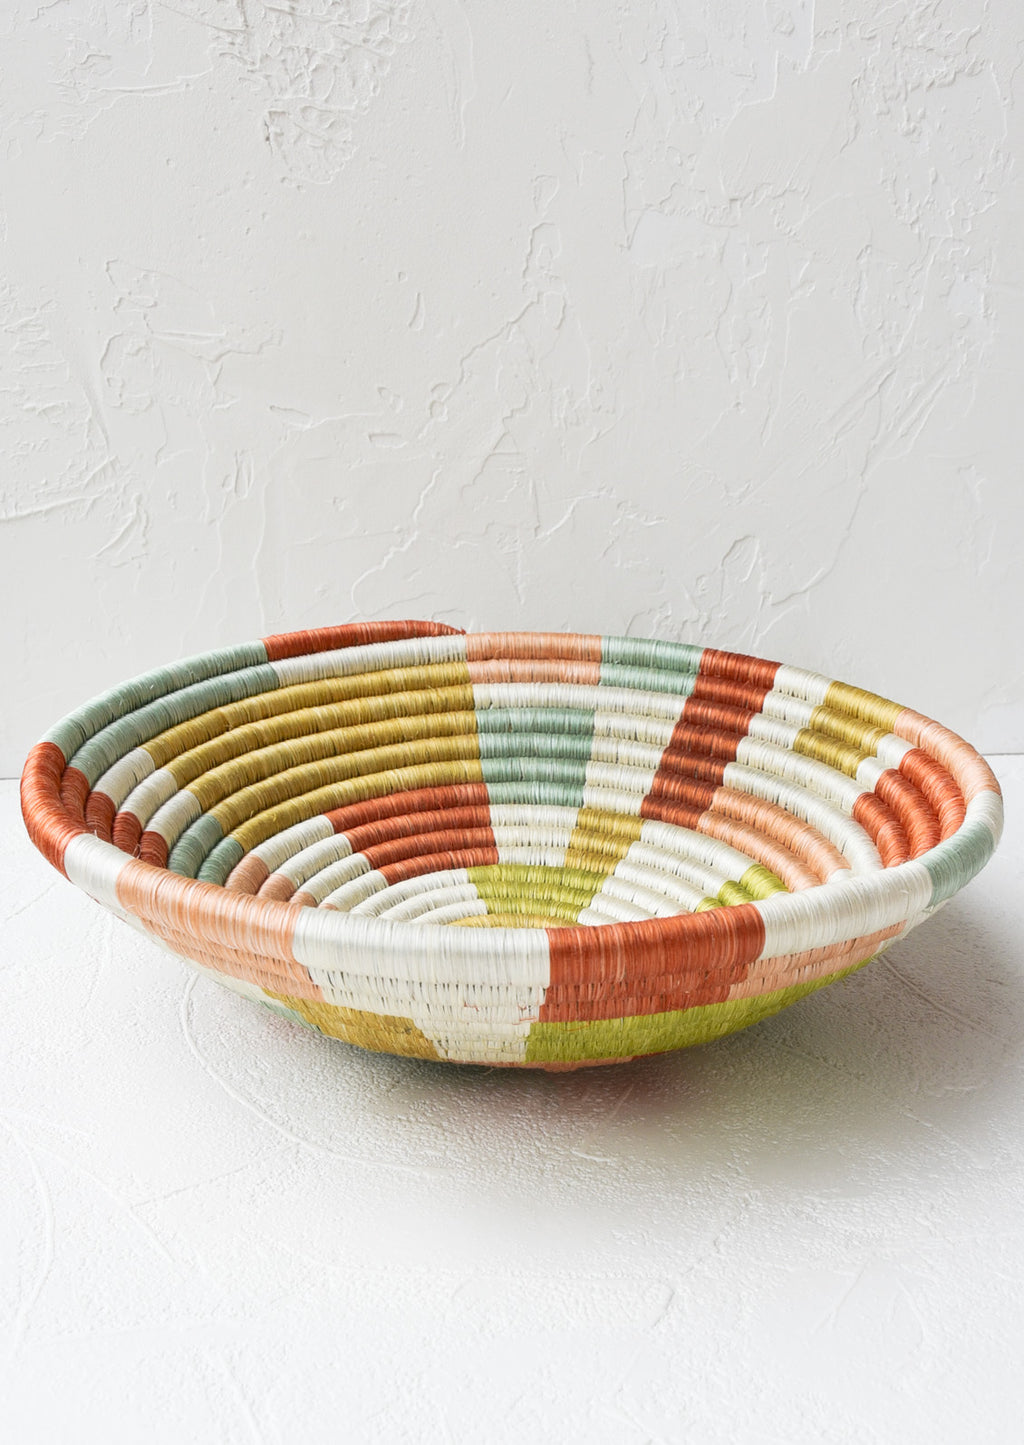 4: A large woven sweetgrass bowl in white with multicolor geometric design.